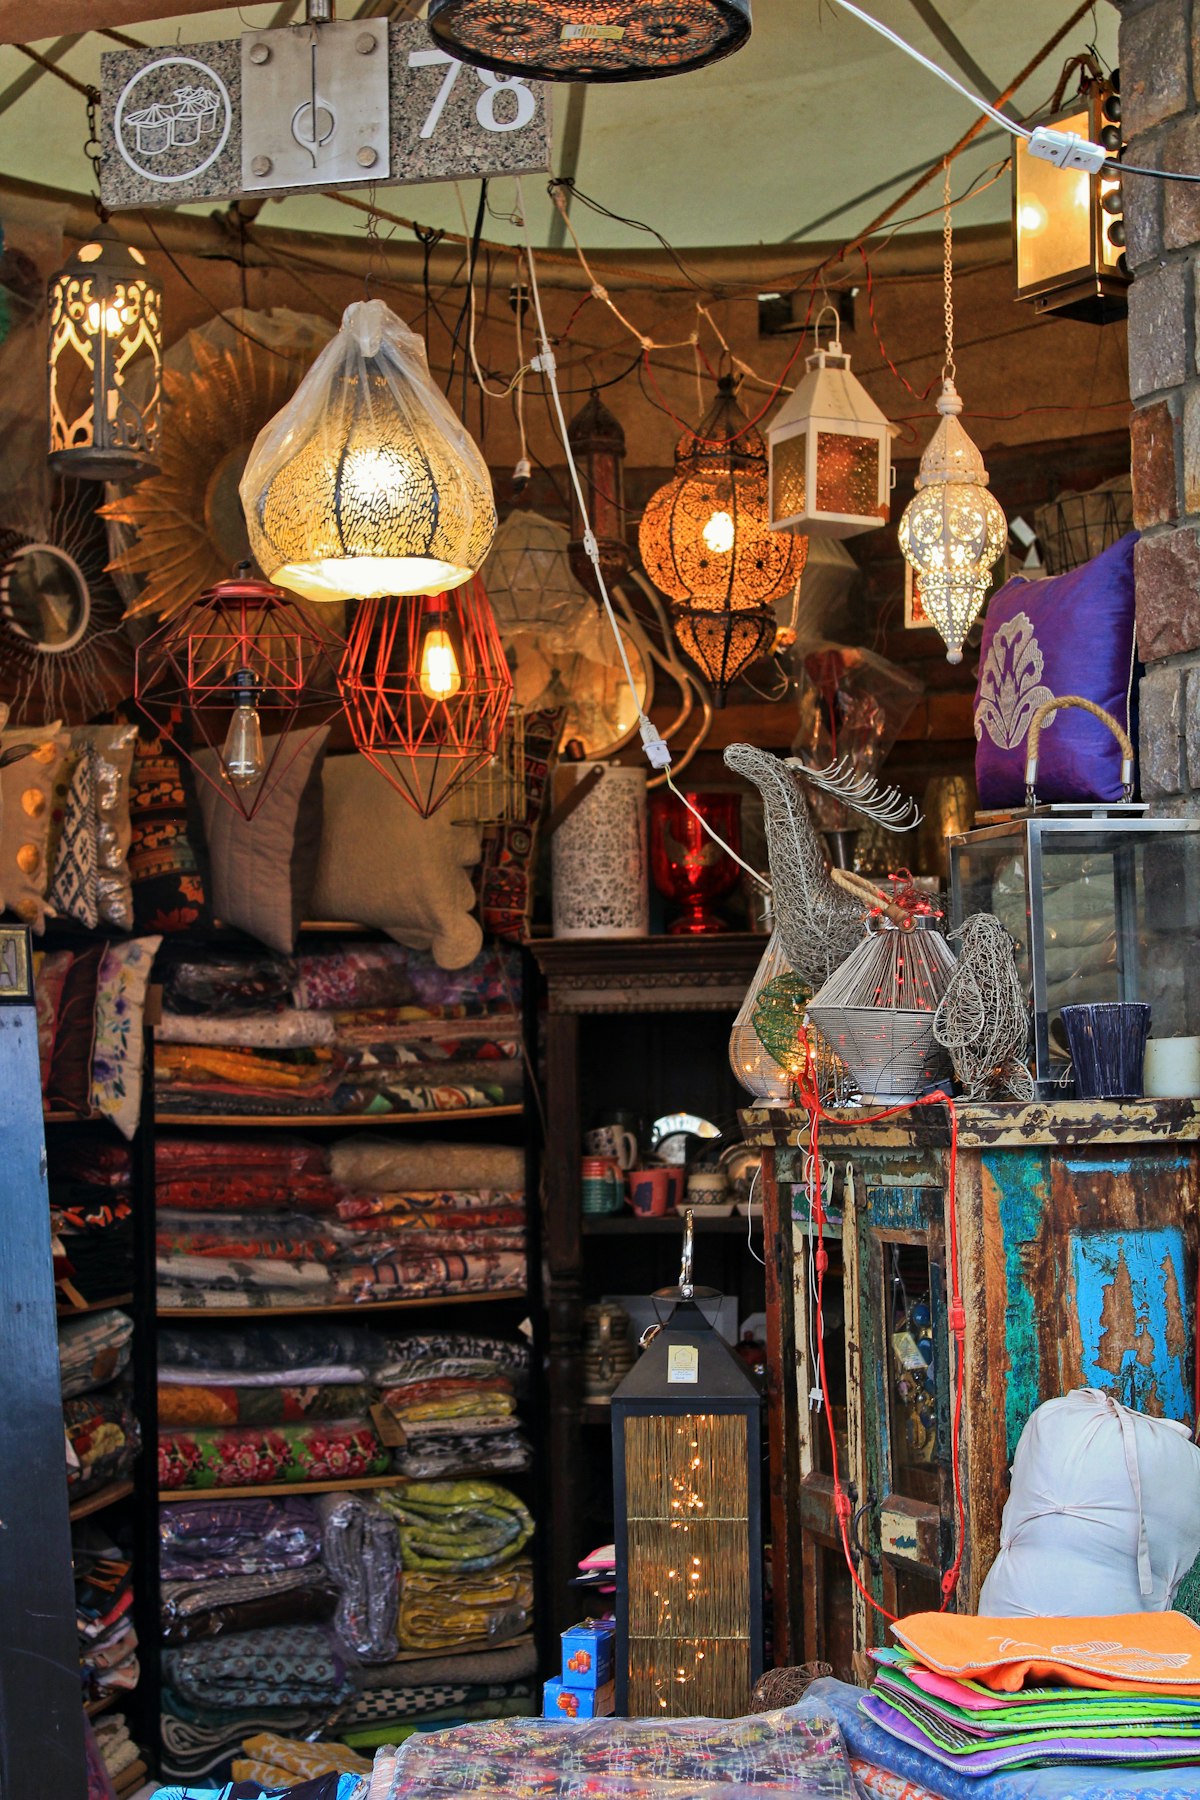 Lamenting A Dying Culture of Haggling